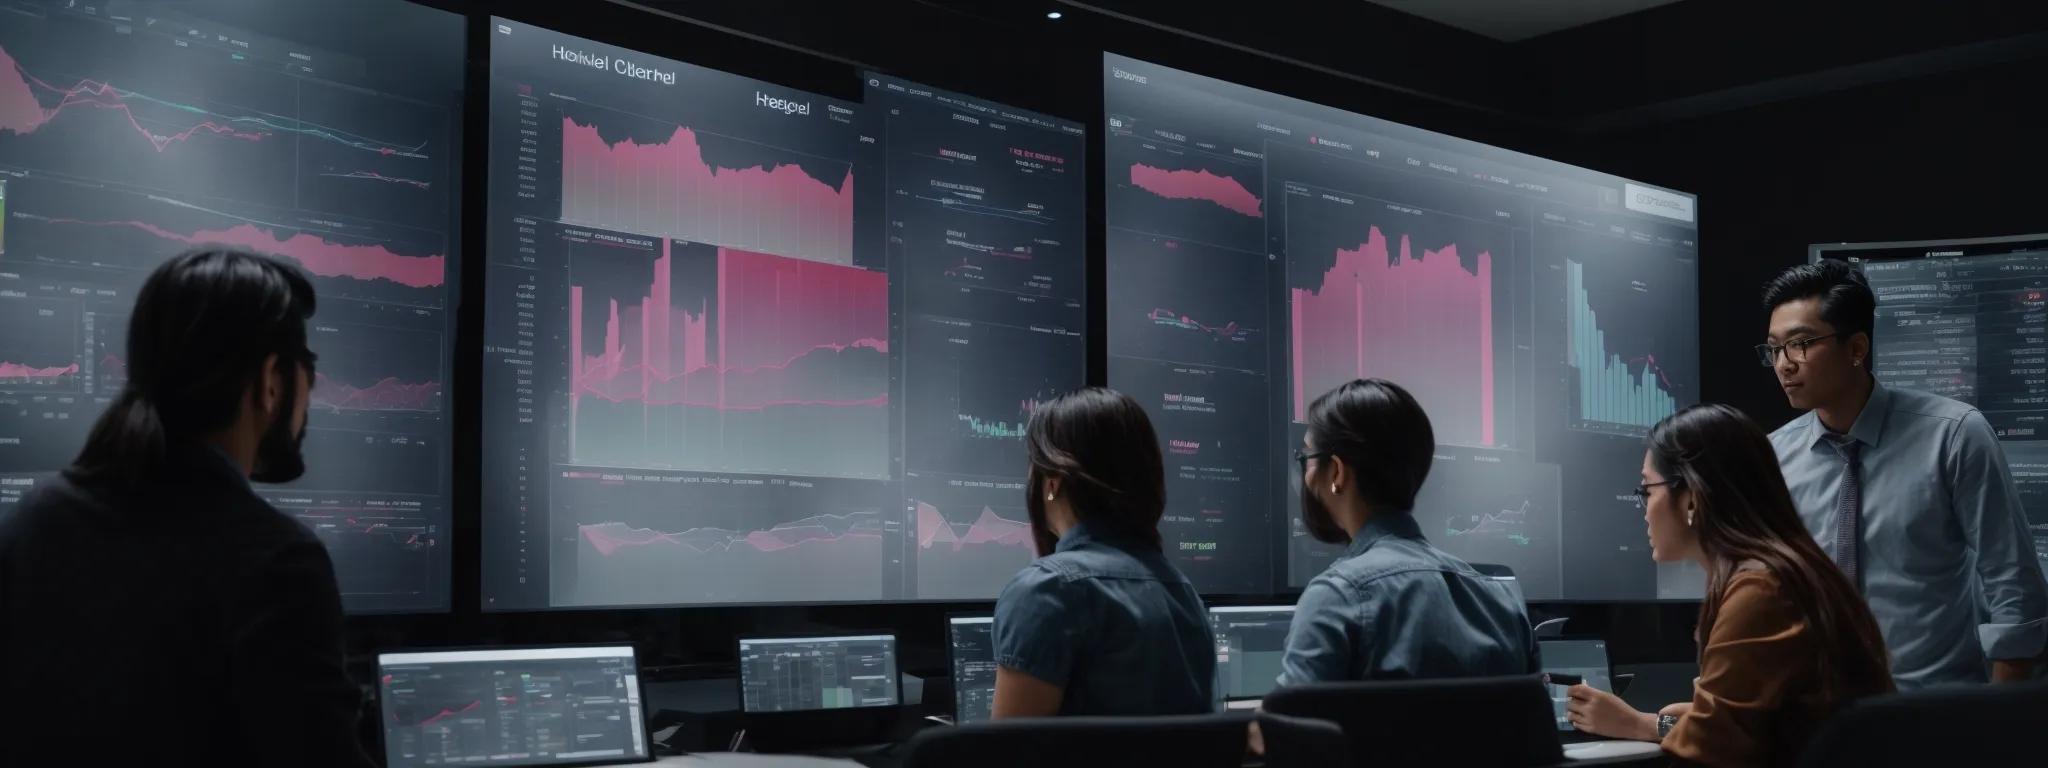 a marketing team analyzing graphs on a large screen displaying consumer data trends.